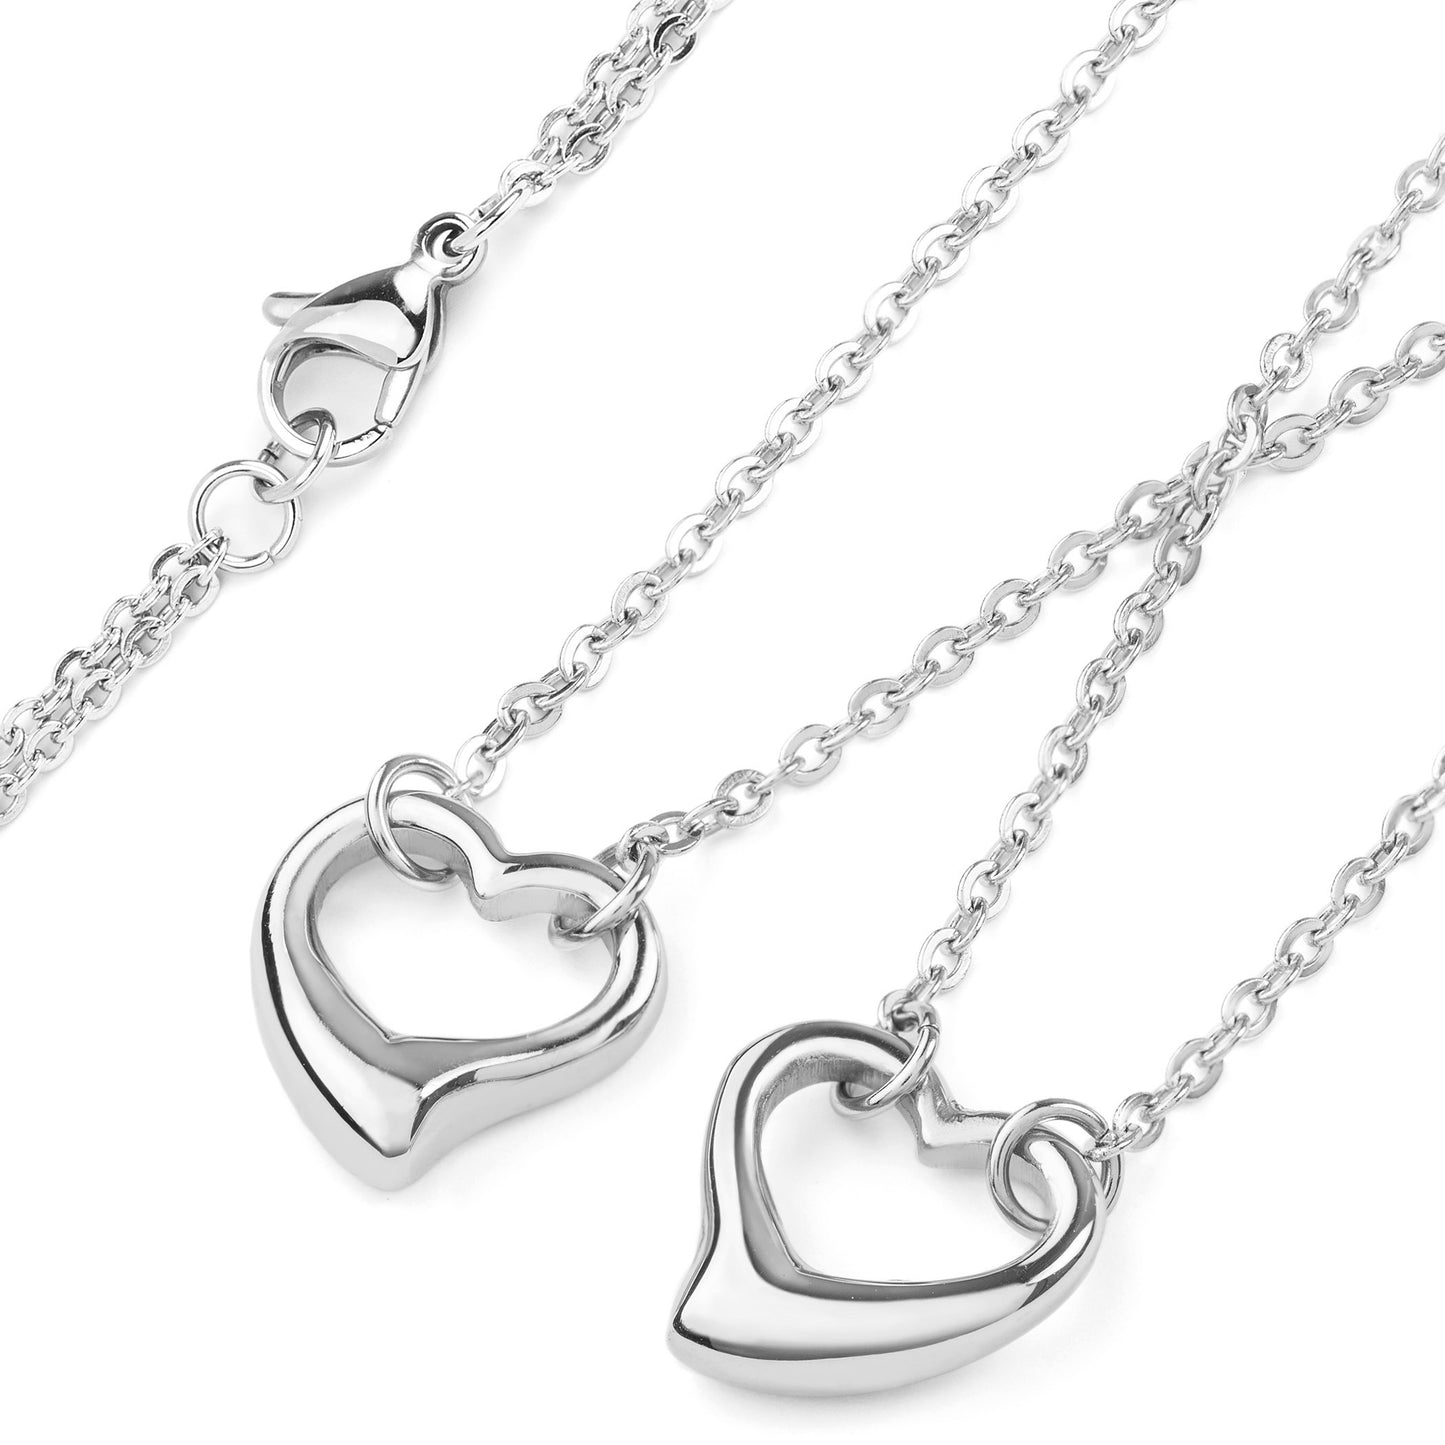 ELYA Polished Double Strand Open Hearts Stainless Steel Necklace (14.6 mm) - 17.5"